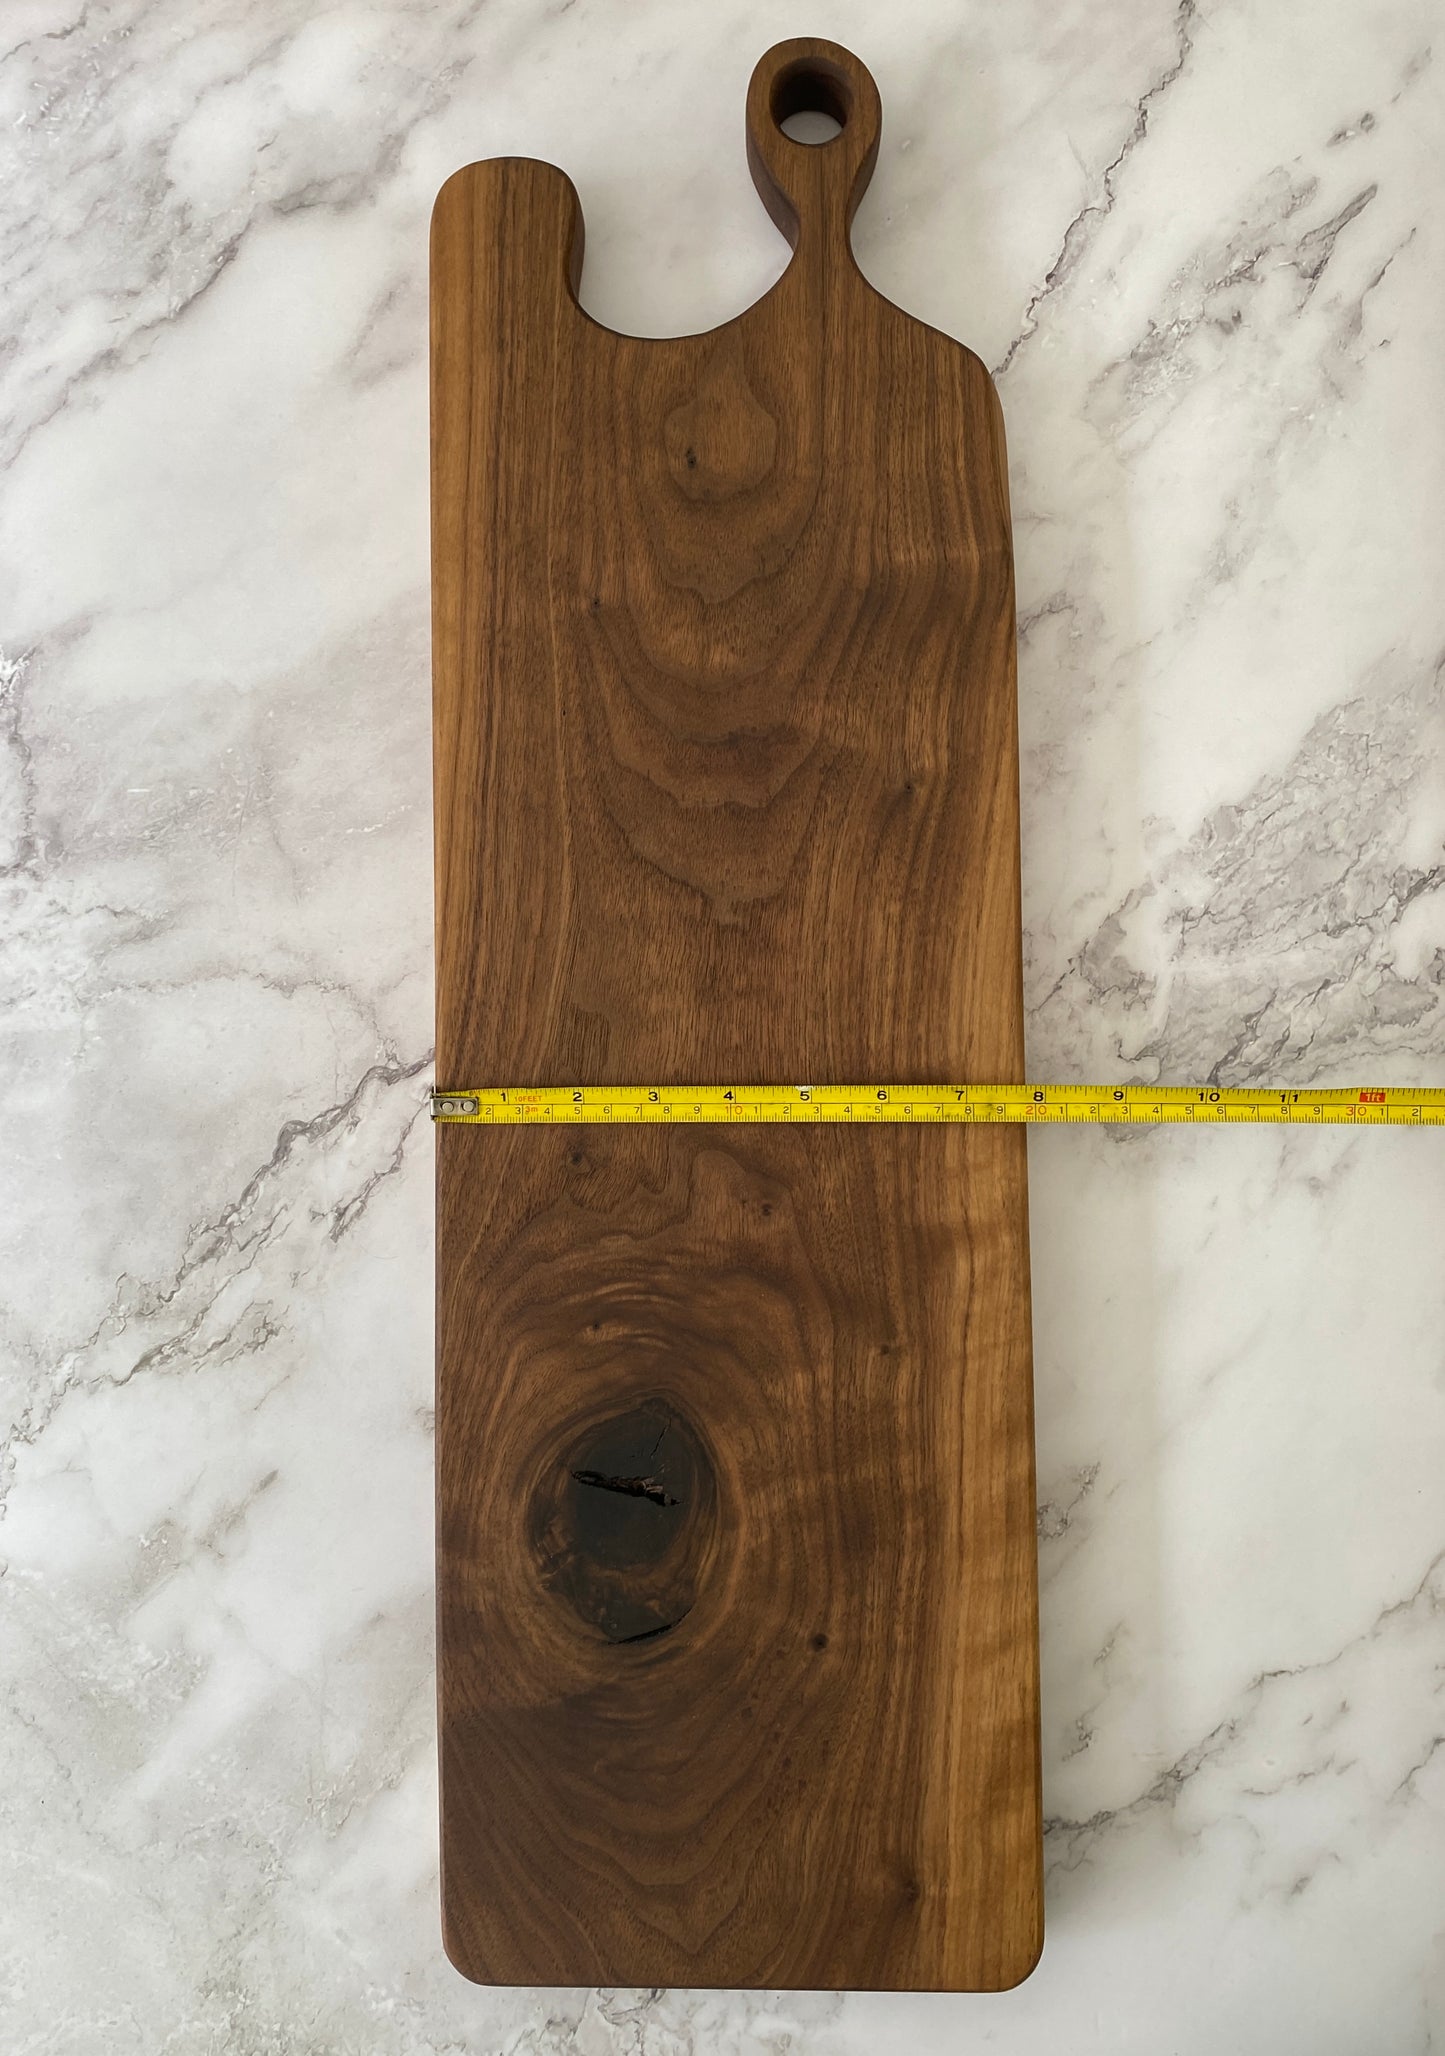 Vintage style black walnut charcuterie board with handle